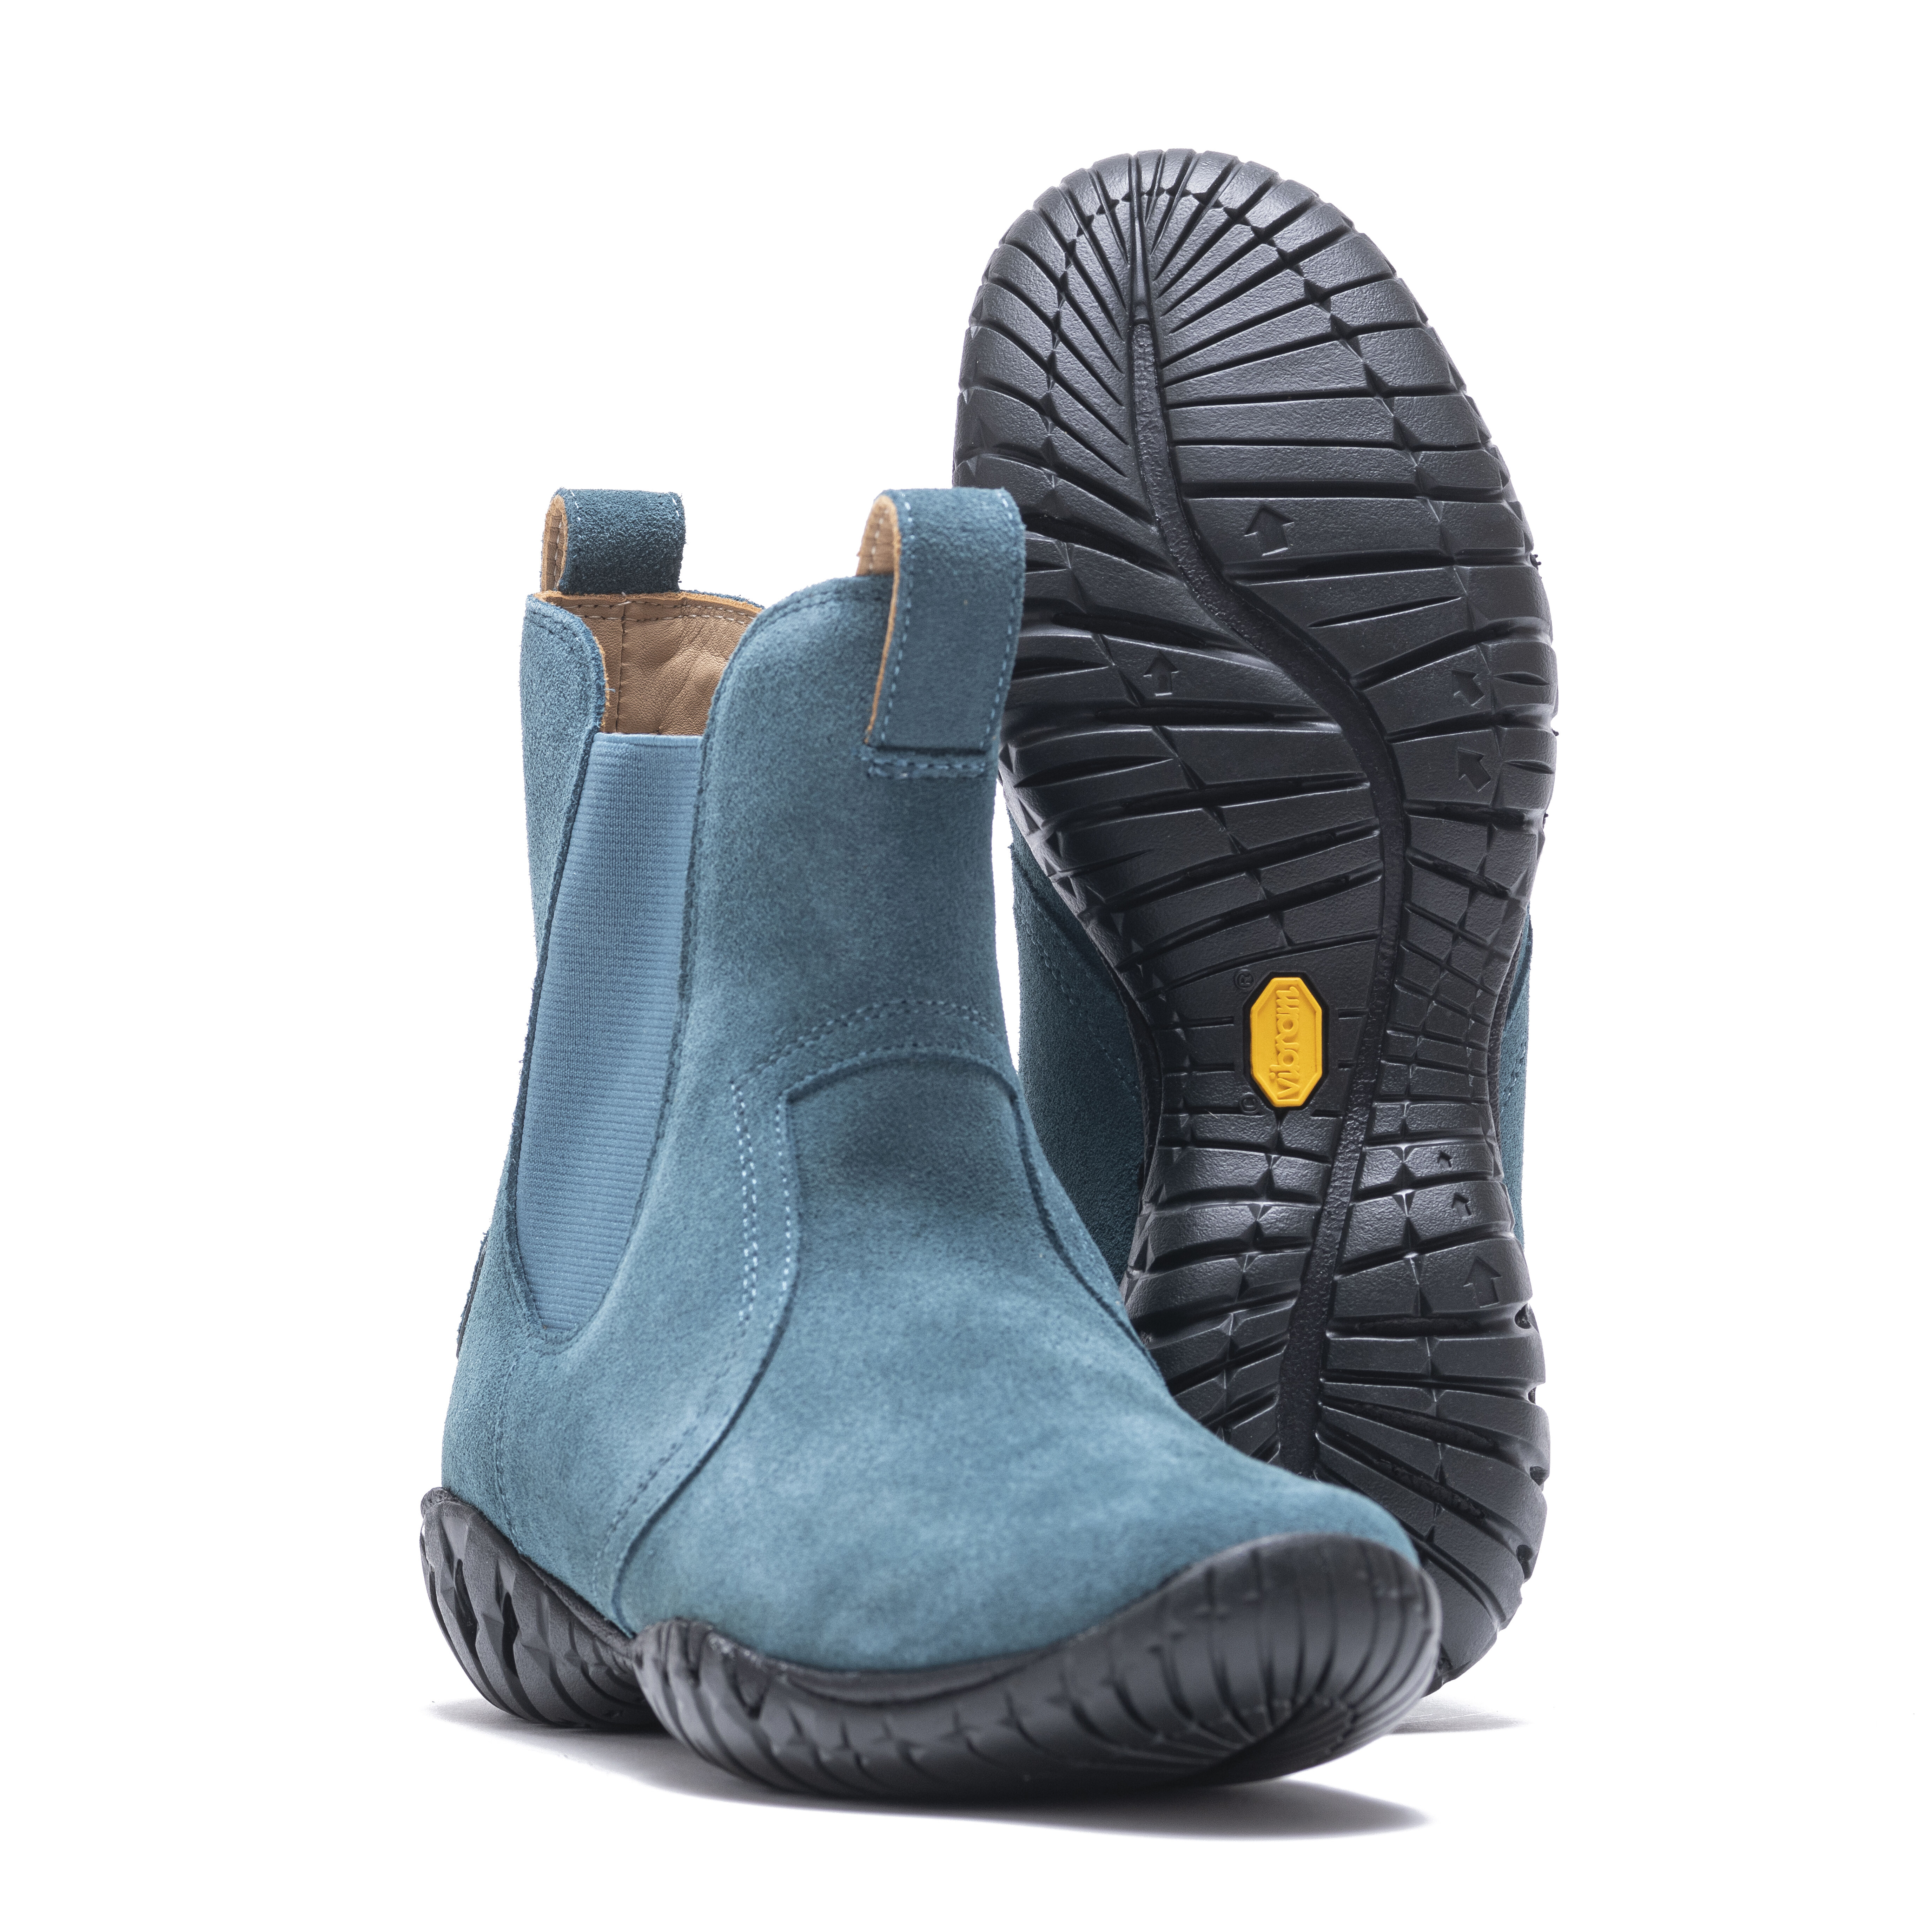 Collections for Men and Women | Vibram USA | Vibram US